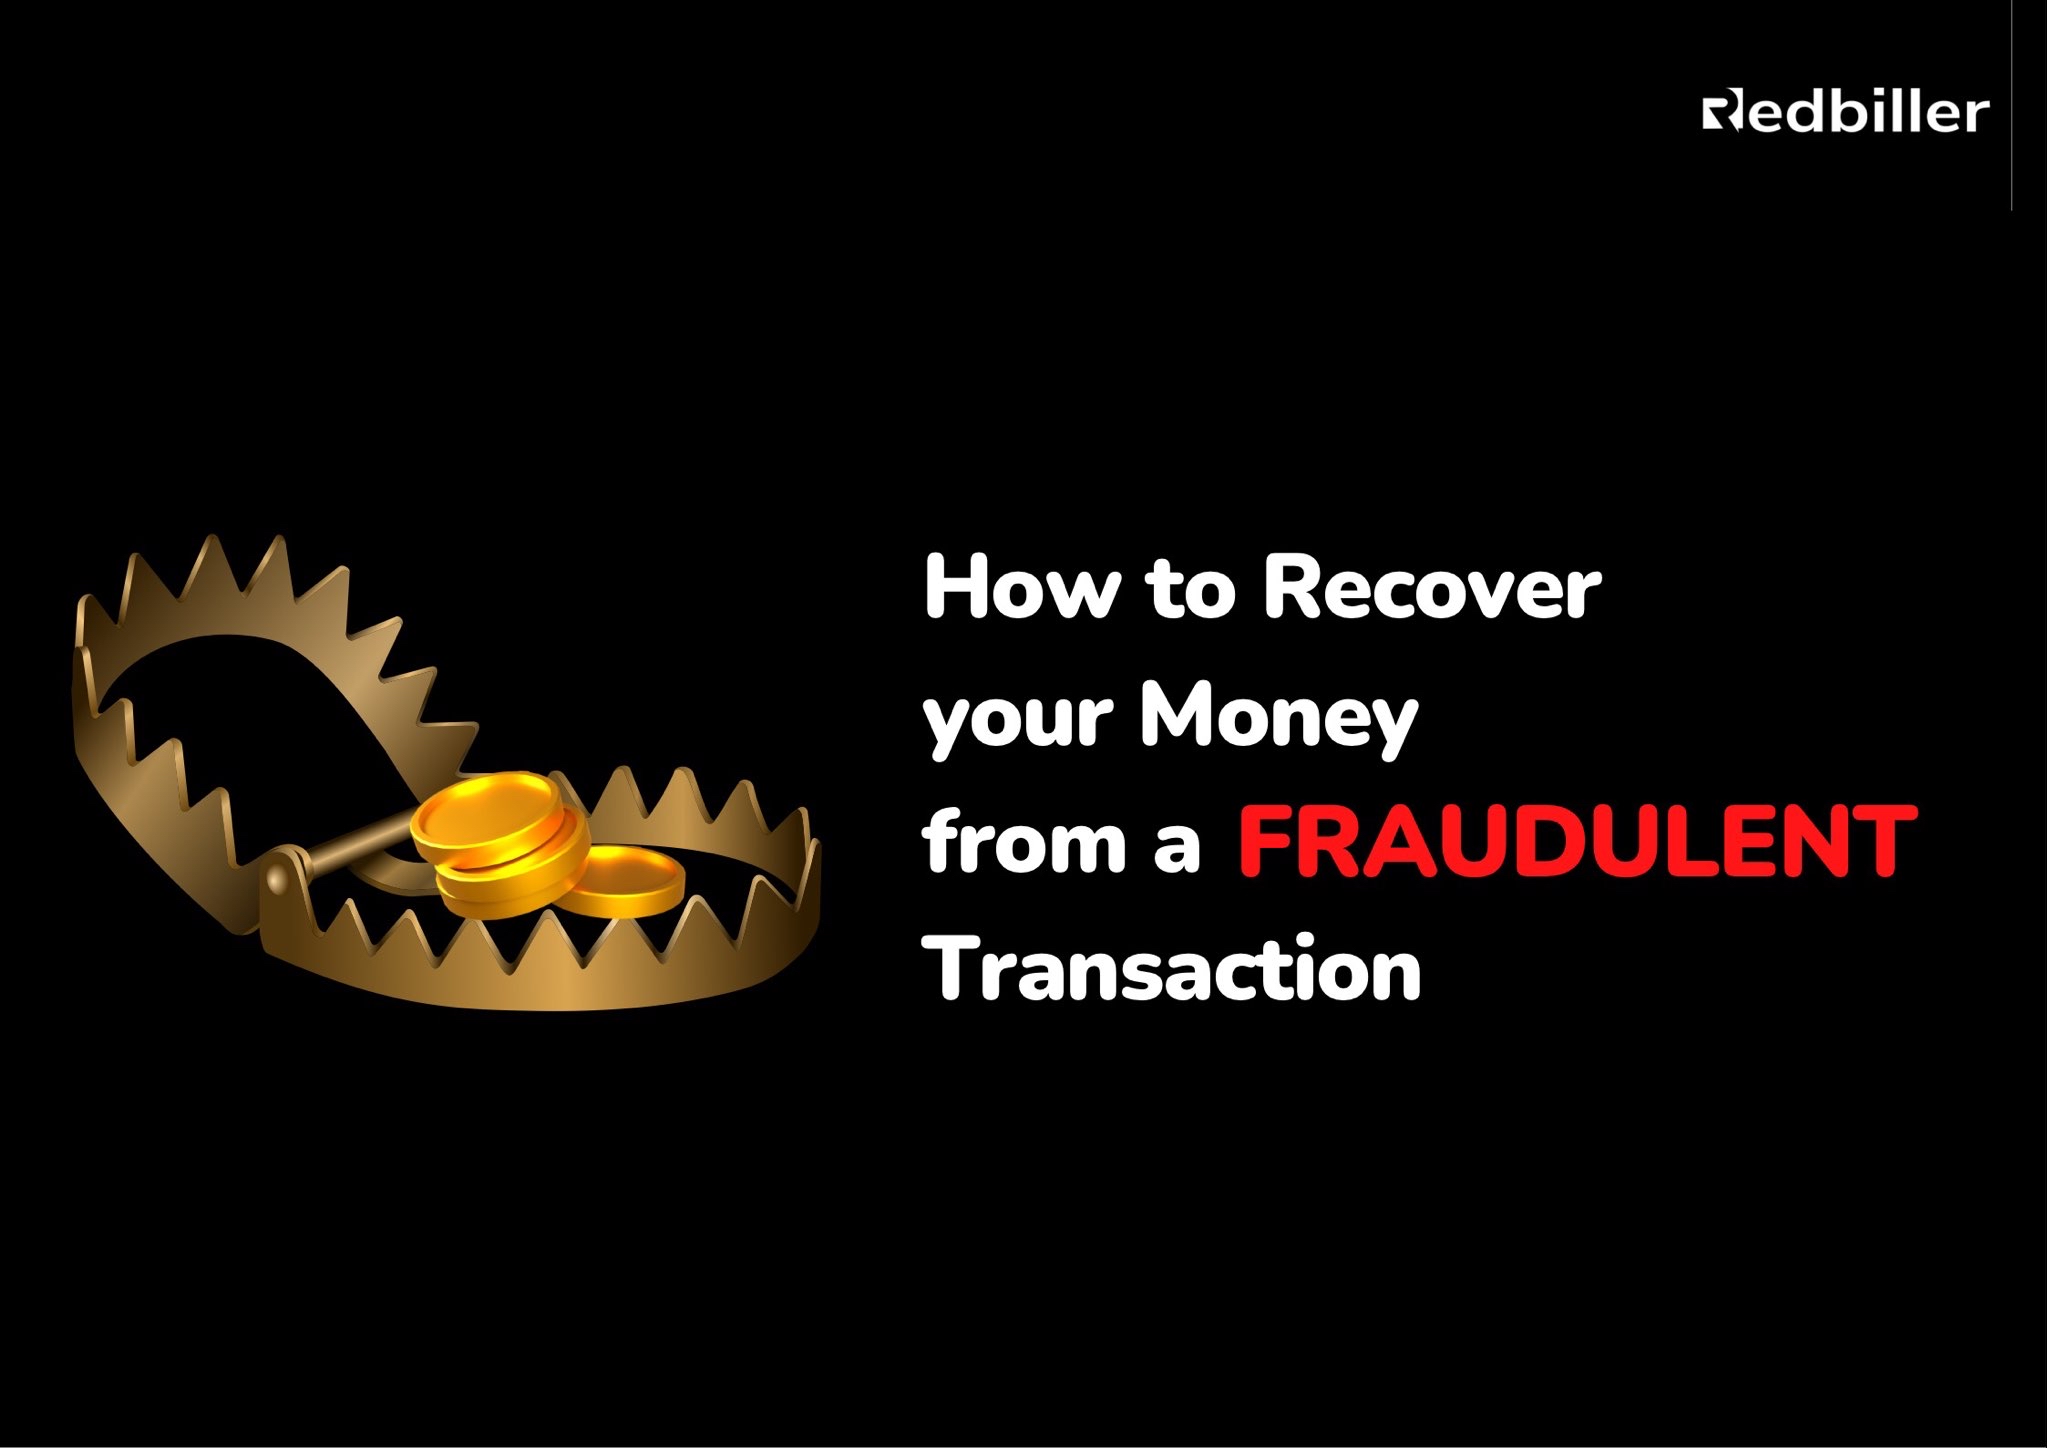 How to Recover your Money from a Fraudulent Transaction